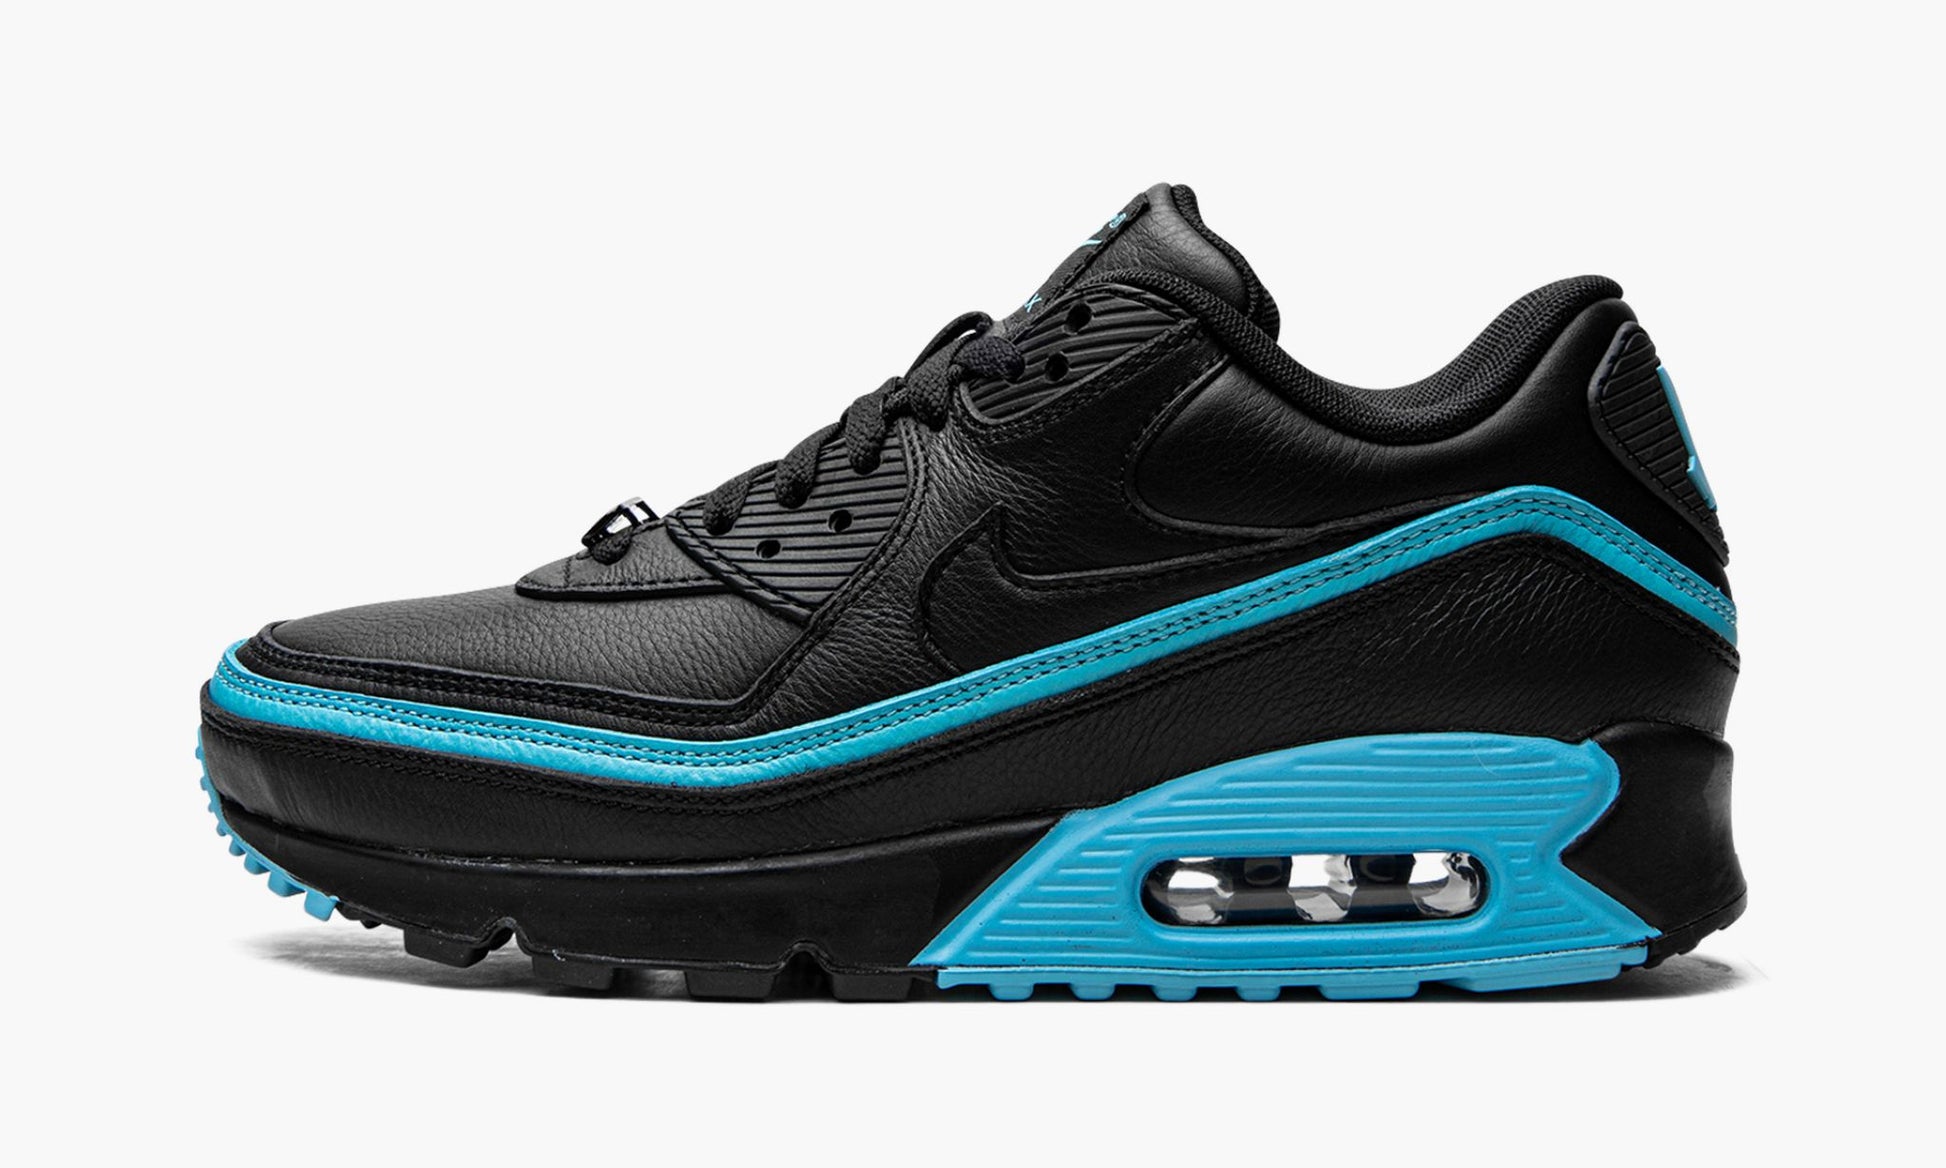 Air Max 90 / UNDFTD "Undefeated Black/Blue Fury"